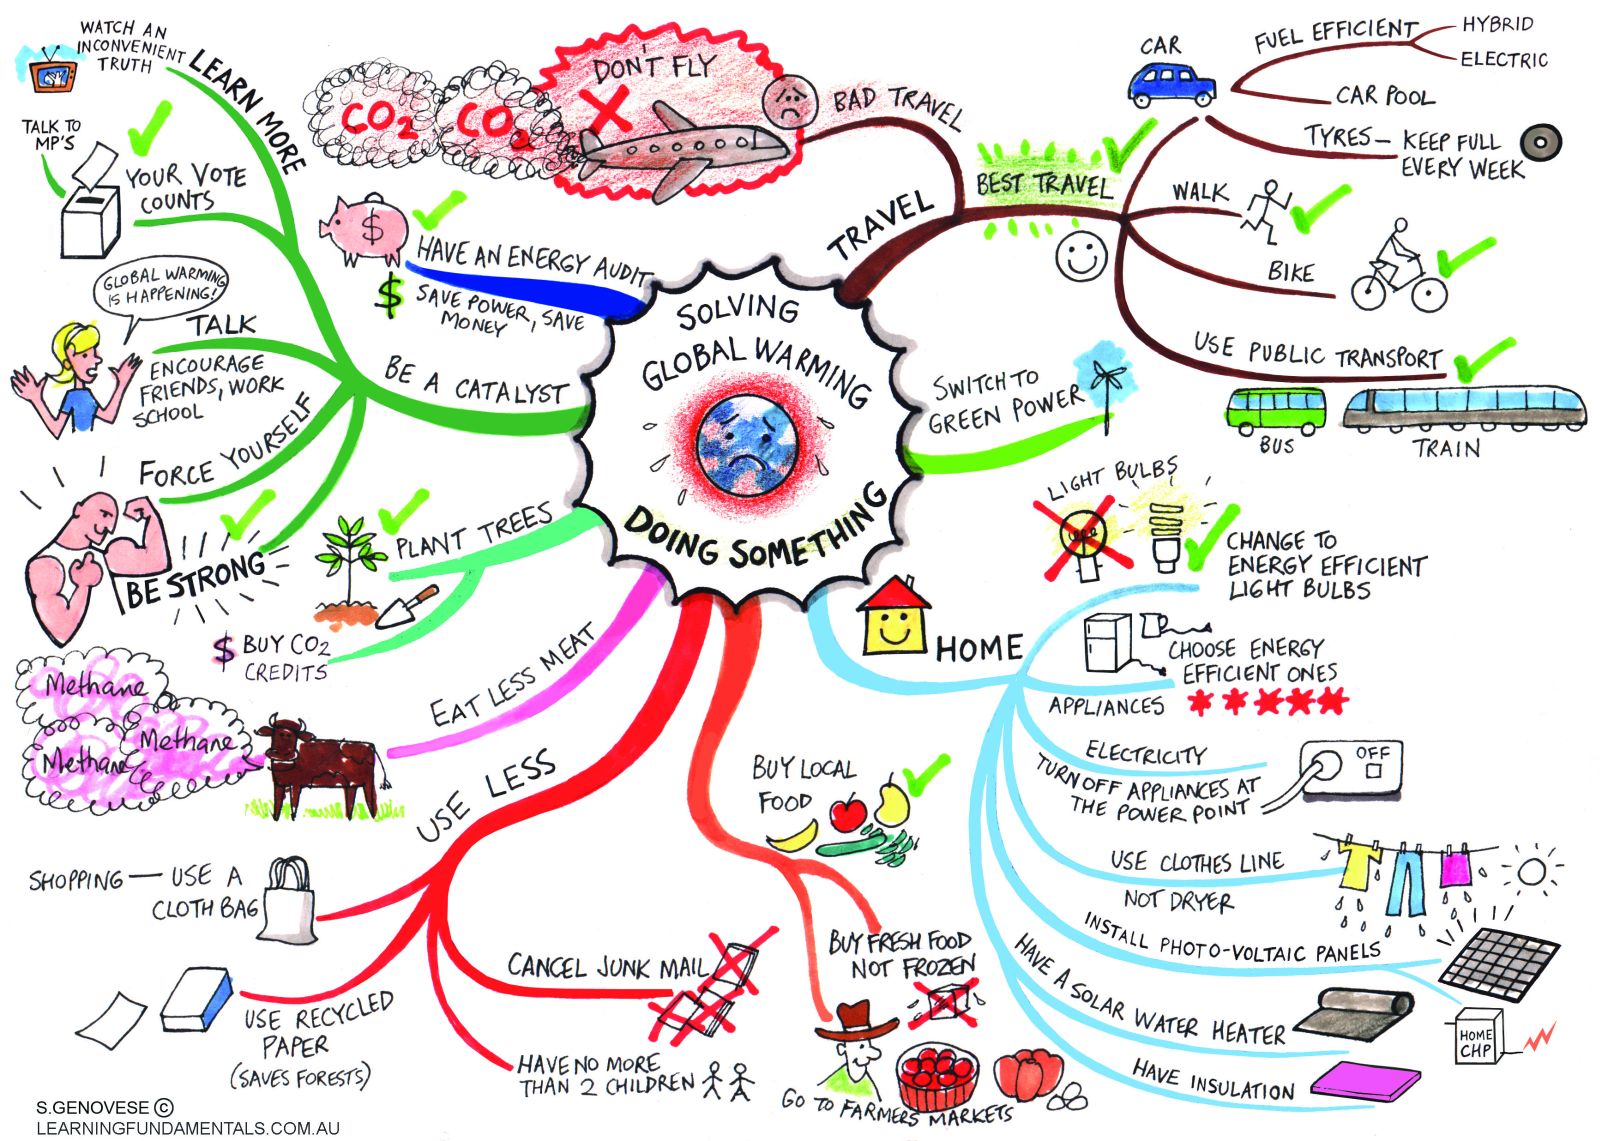 Add Notes to your mind maps